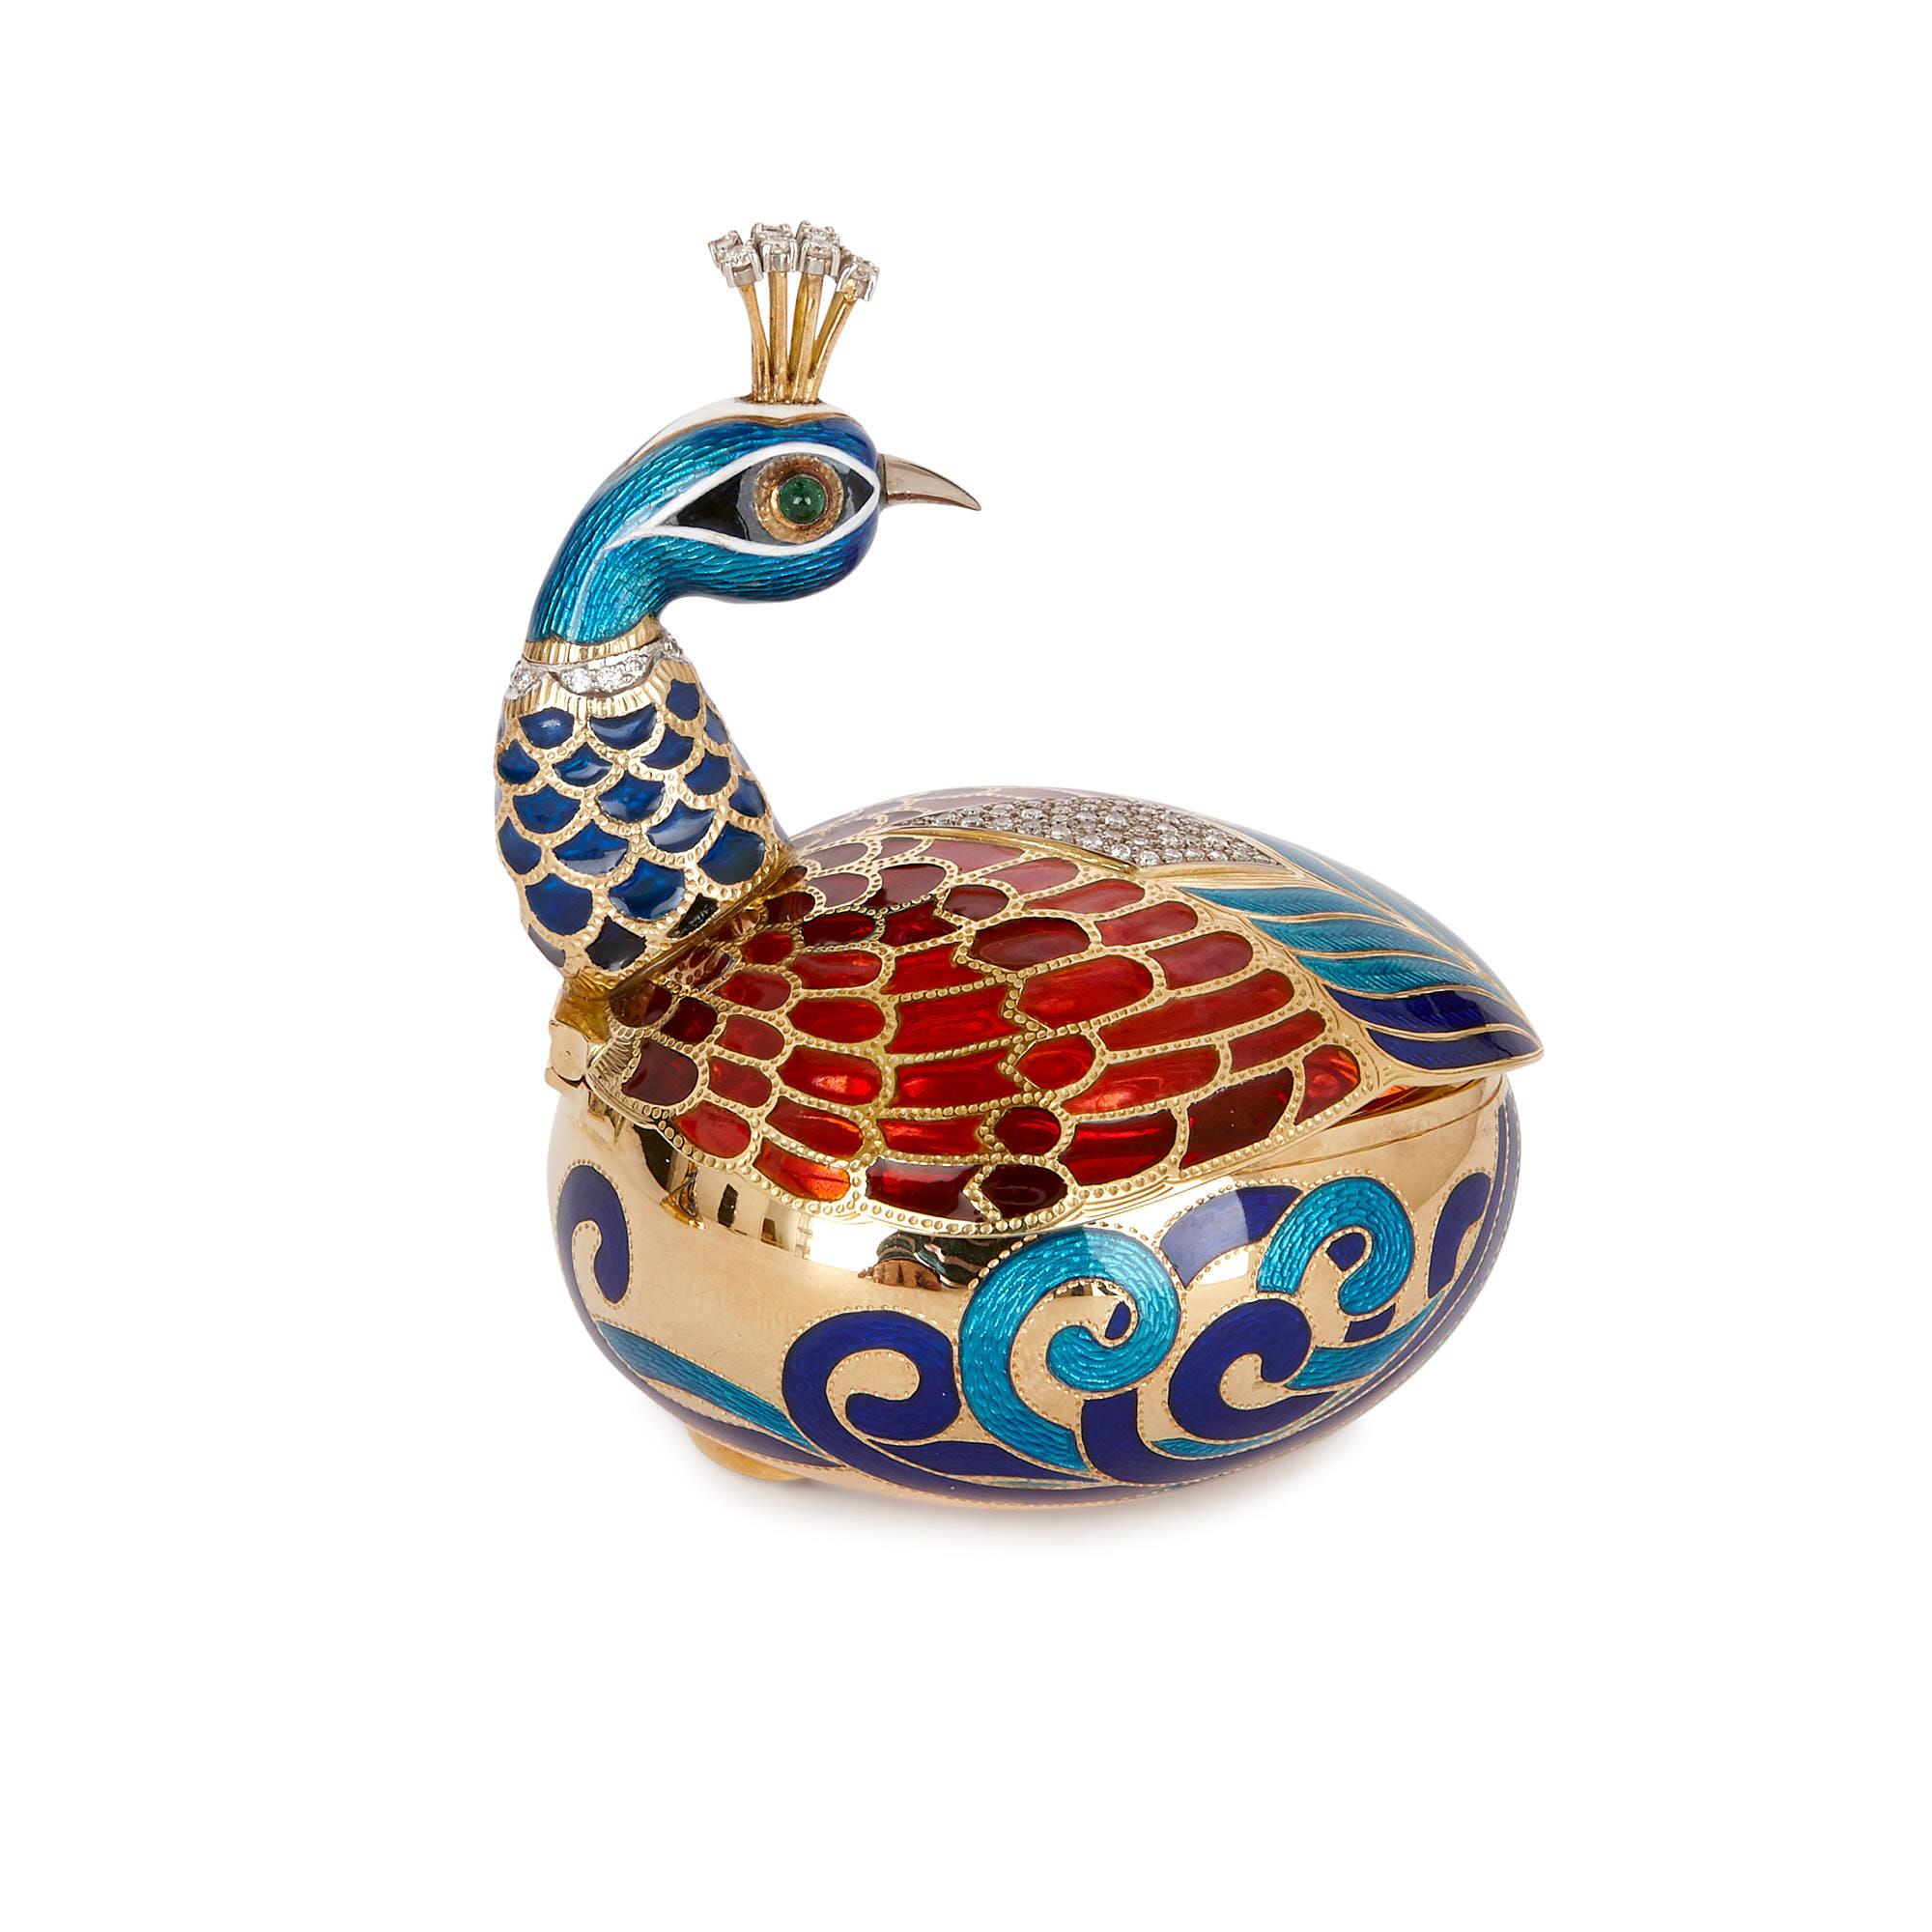 English Fabergé Style Bejewelled and Enamelled Gold Egg by Asprey For Sale